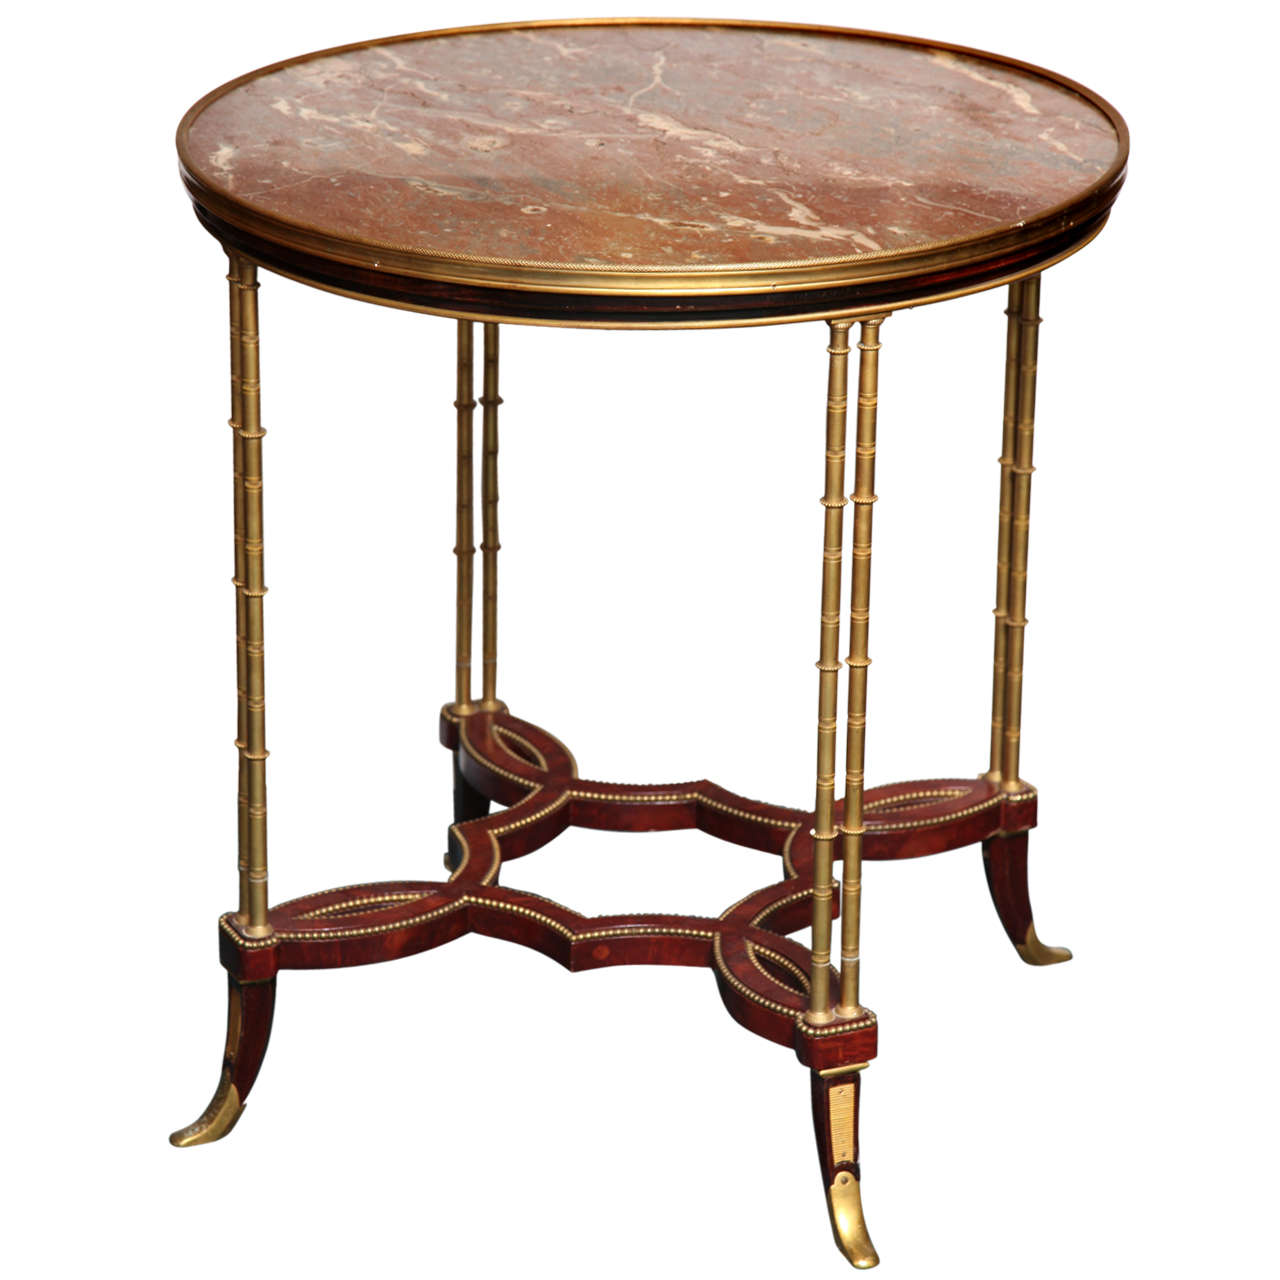 Very Fine Louis XVI Style Round Marble Top Gueridon with Bamboo Bronze Legs